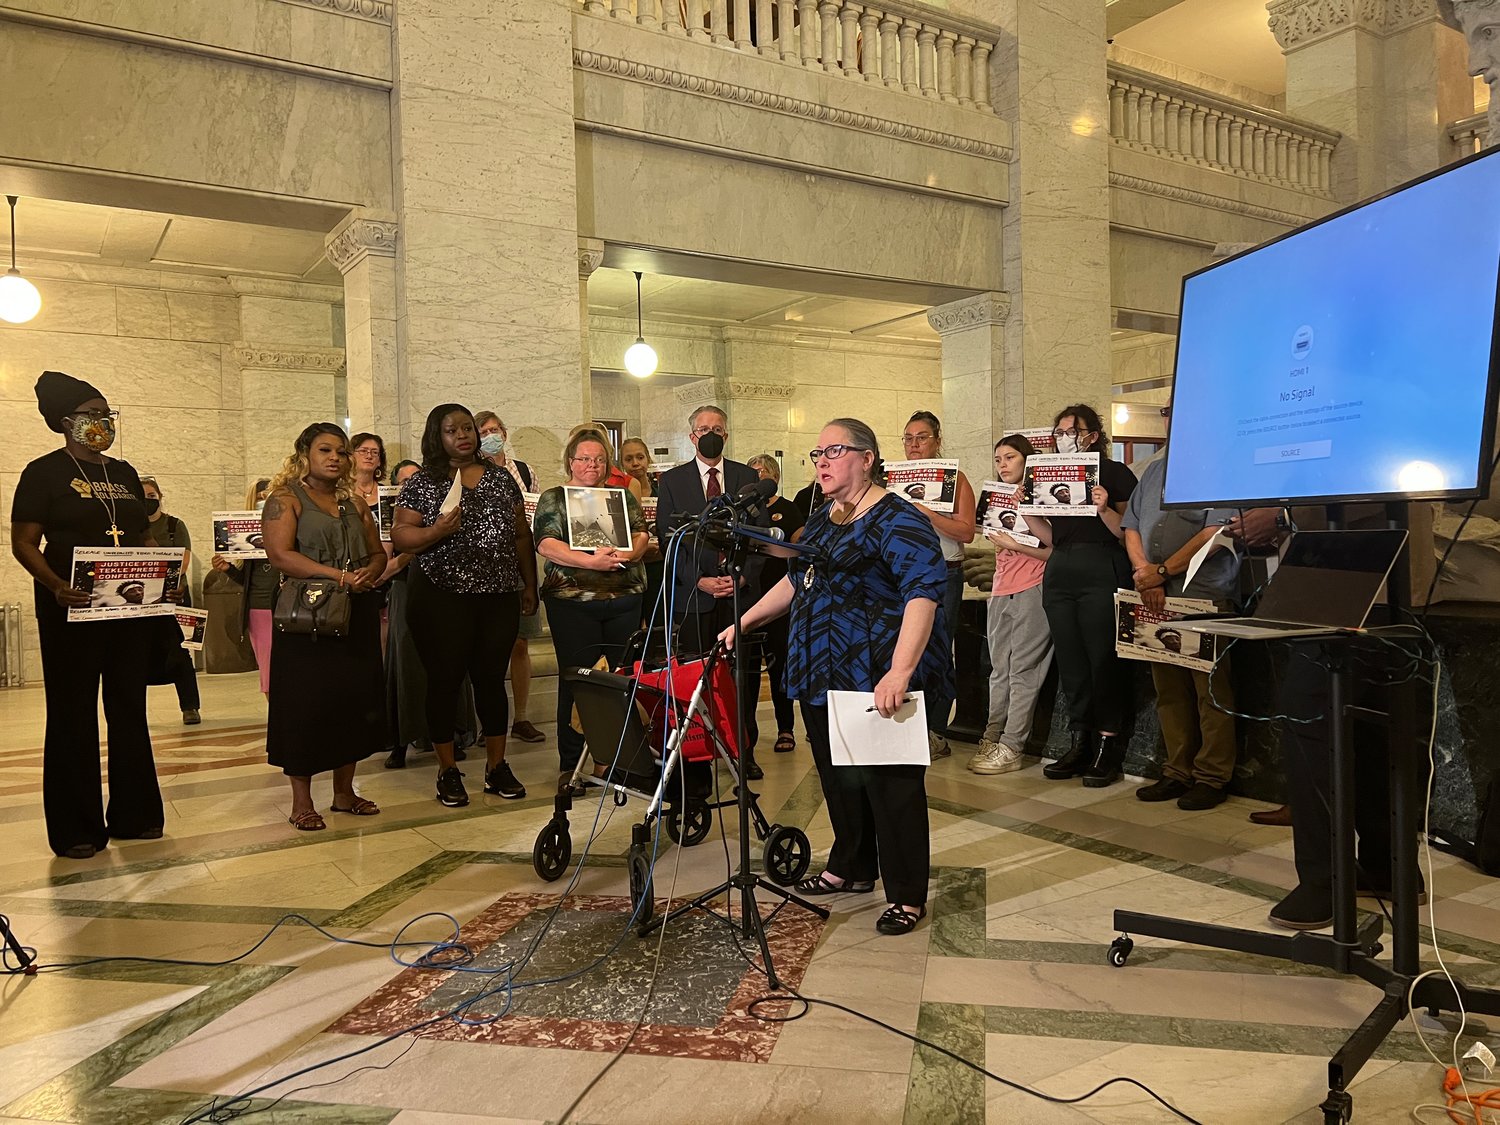 Michelle Gross, speaking at an August 17 press conference at City Hall, shares a community member’s video and raises questions about the MPD killing of Tekle Sundberg .